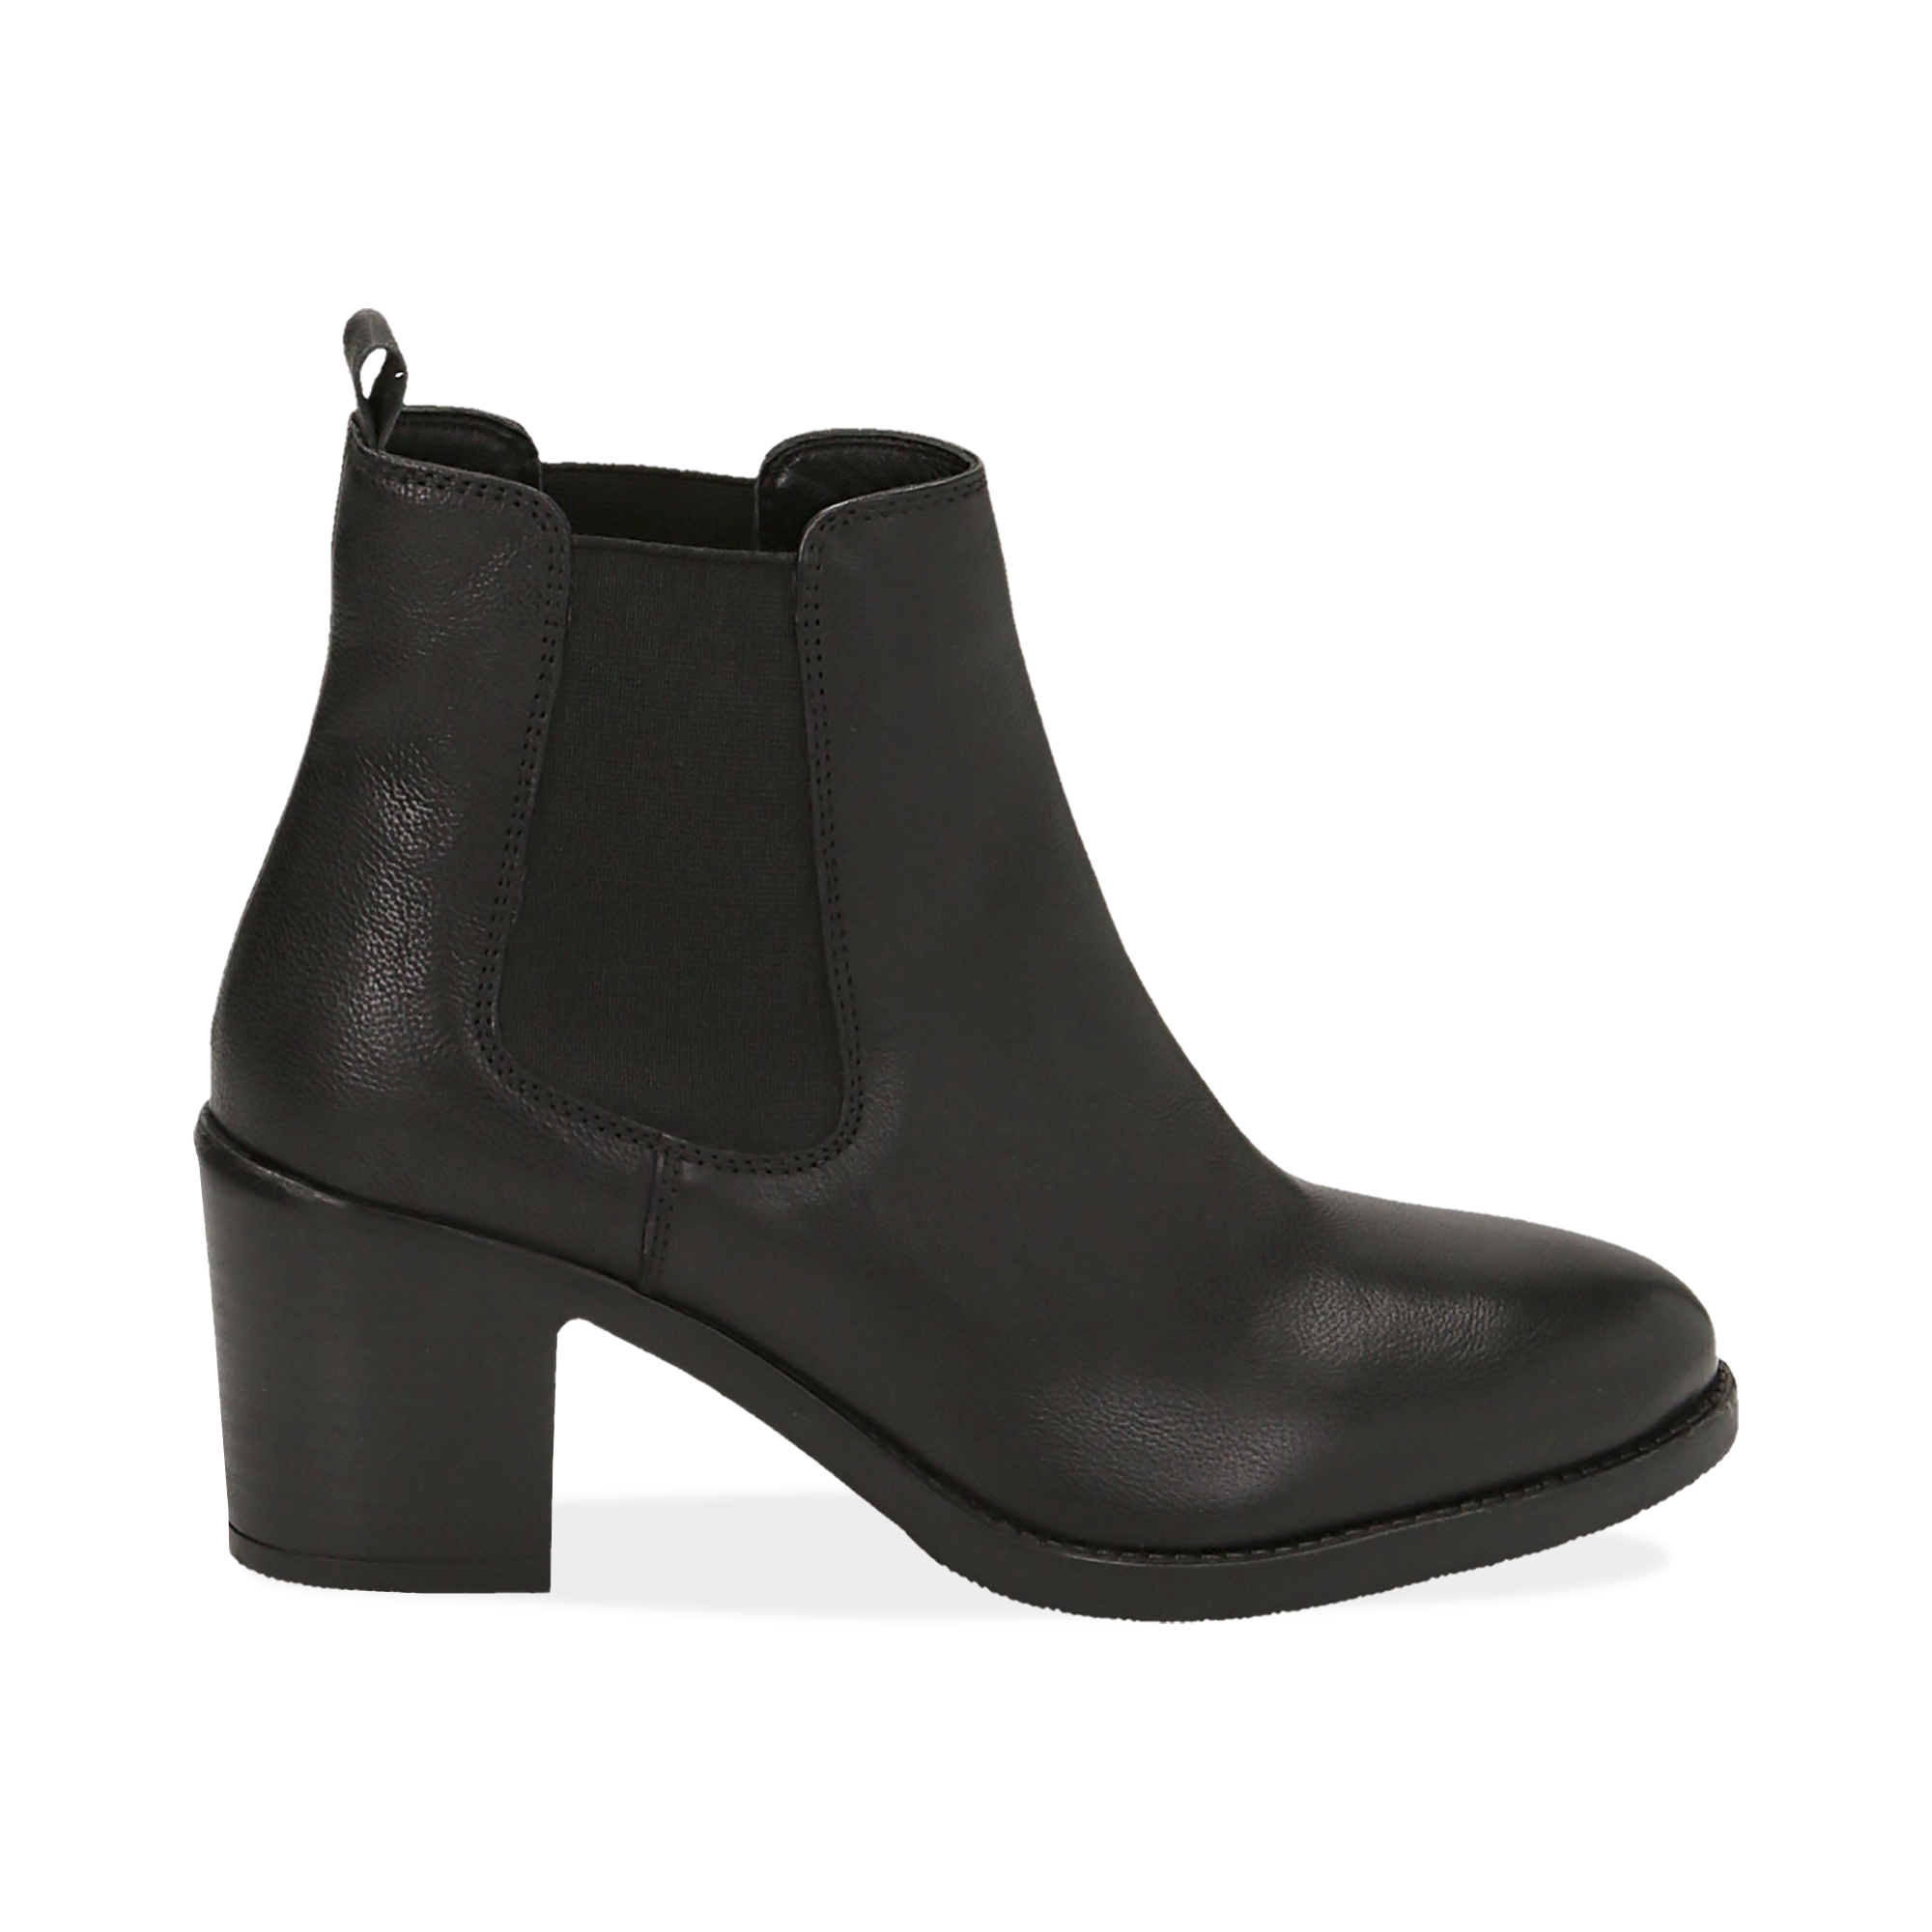 Ankle boots neri in pelle, tacco 4,50 cm